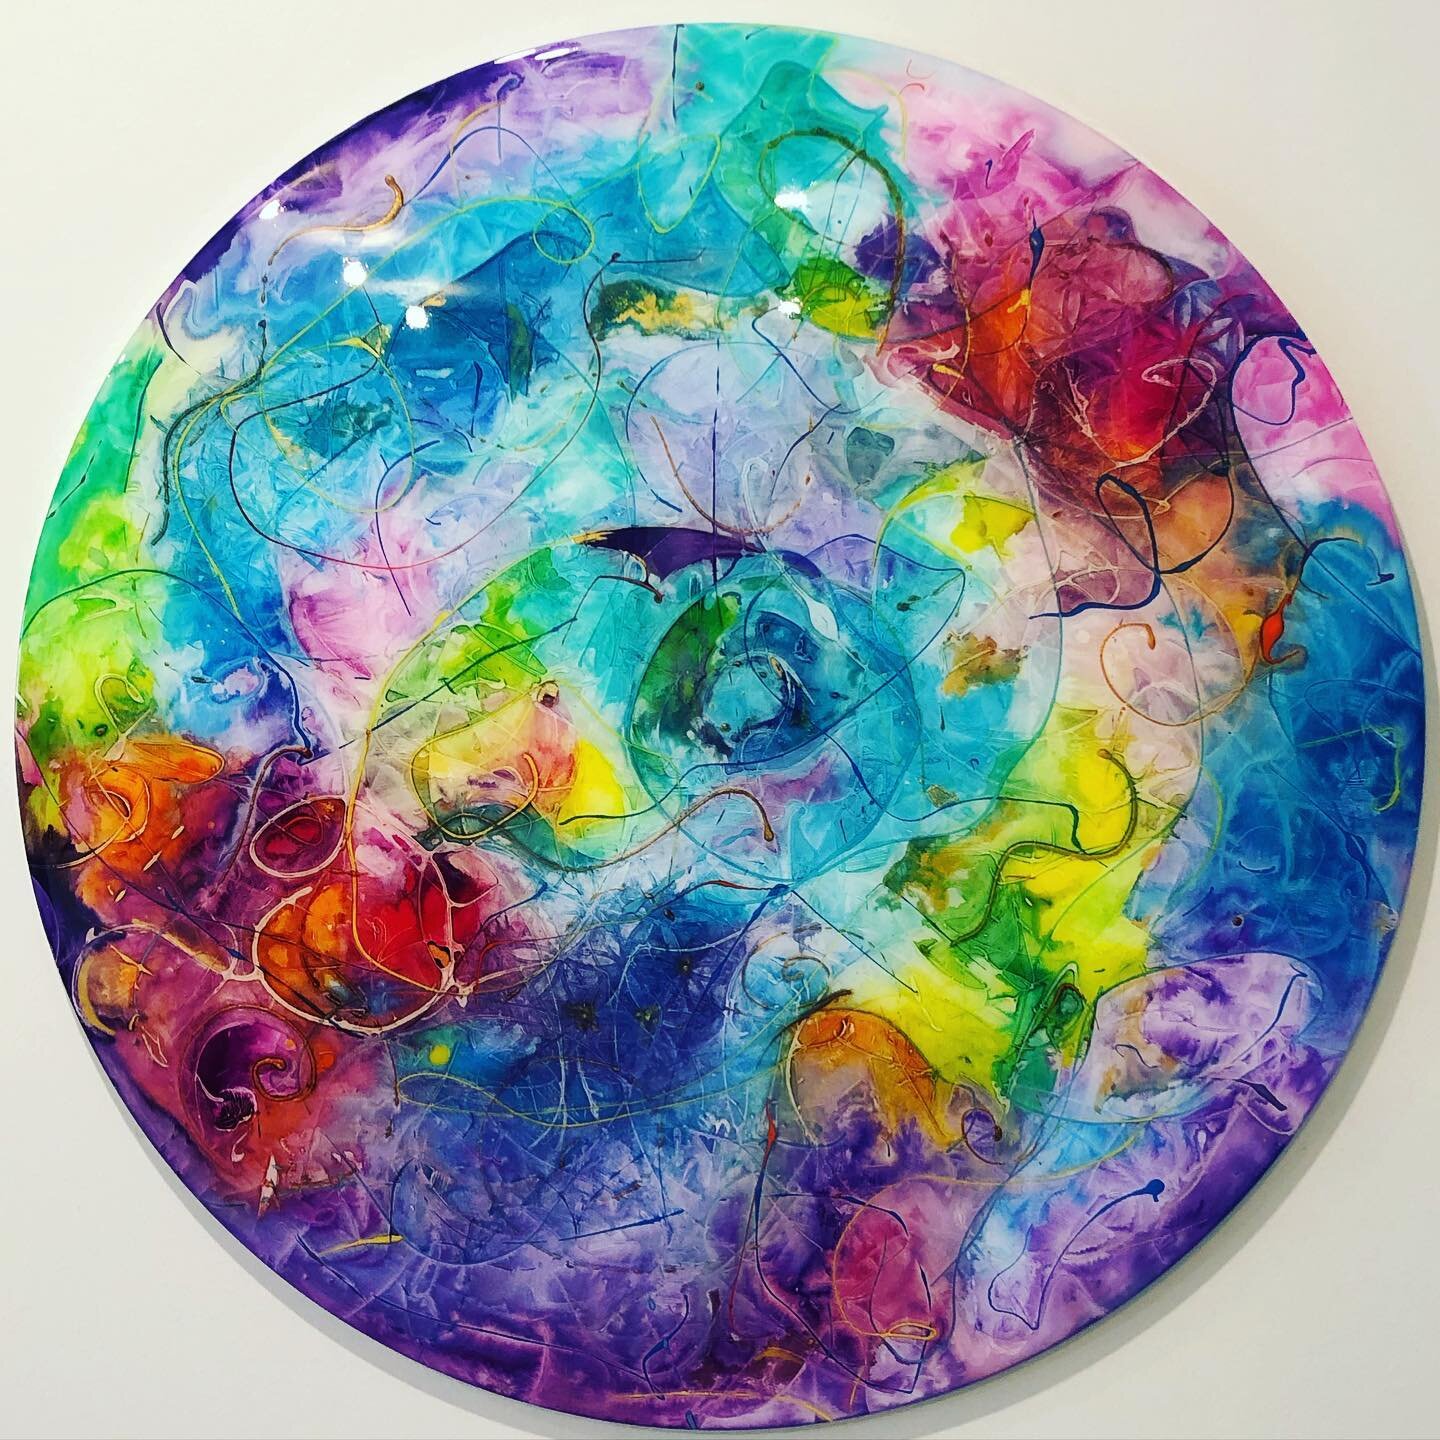 My newest Portal resin
SOULFLAKE!! 

I loved painting and playing in the energy of this one. 

Thank you JennyMerritt for the opportunity ❤️

#soulflakes #soulflakestudio #resinart #colour #colourful #colourheals #artheals #healingtools #wholeness #c